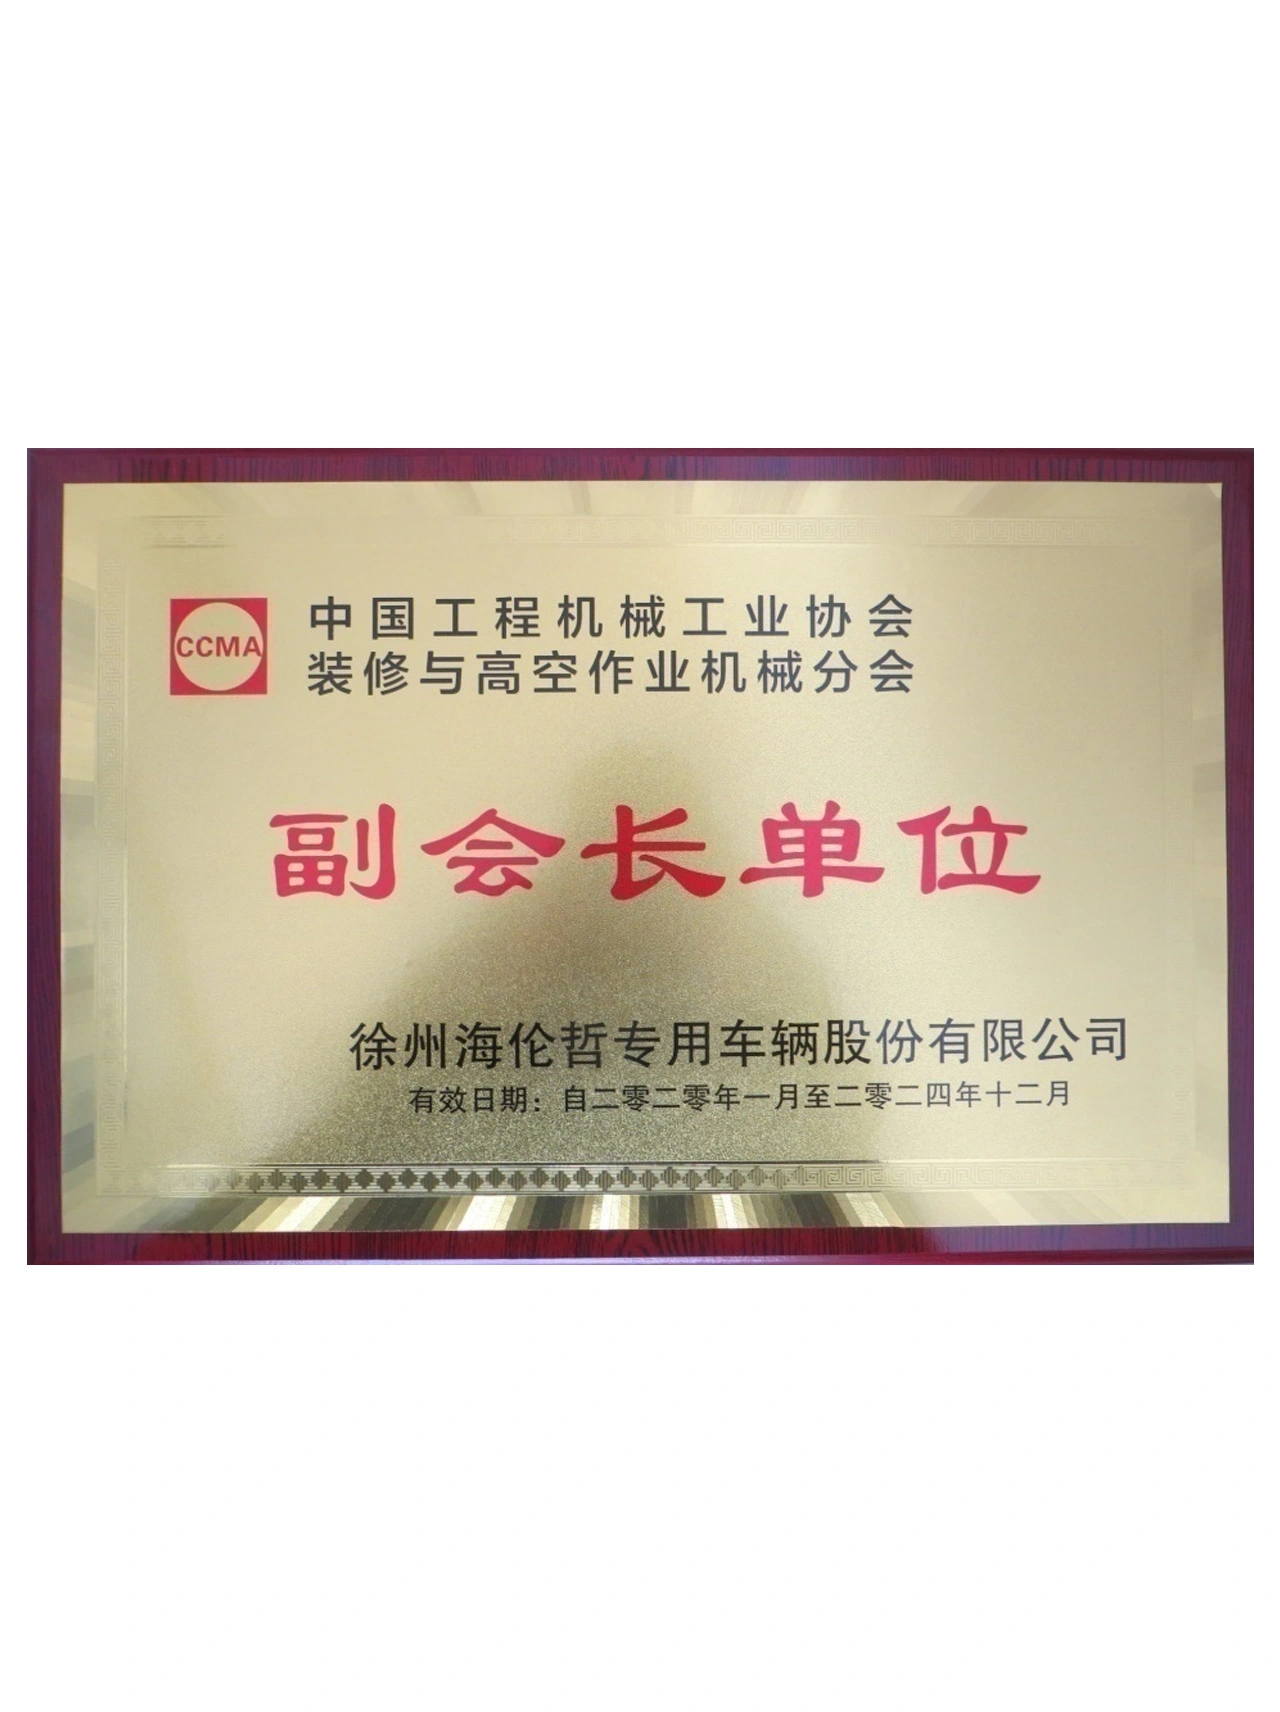 china construction machinery industry association vice president unit